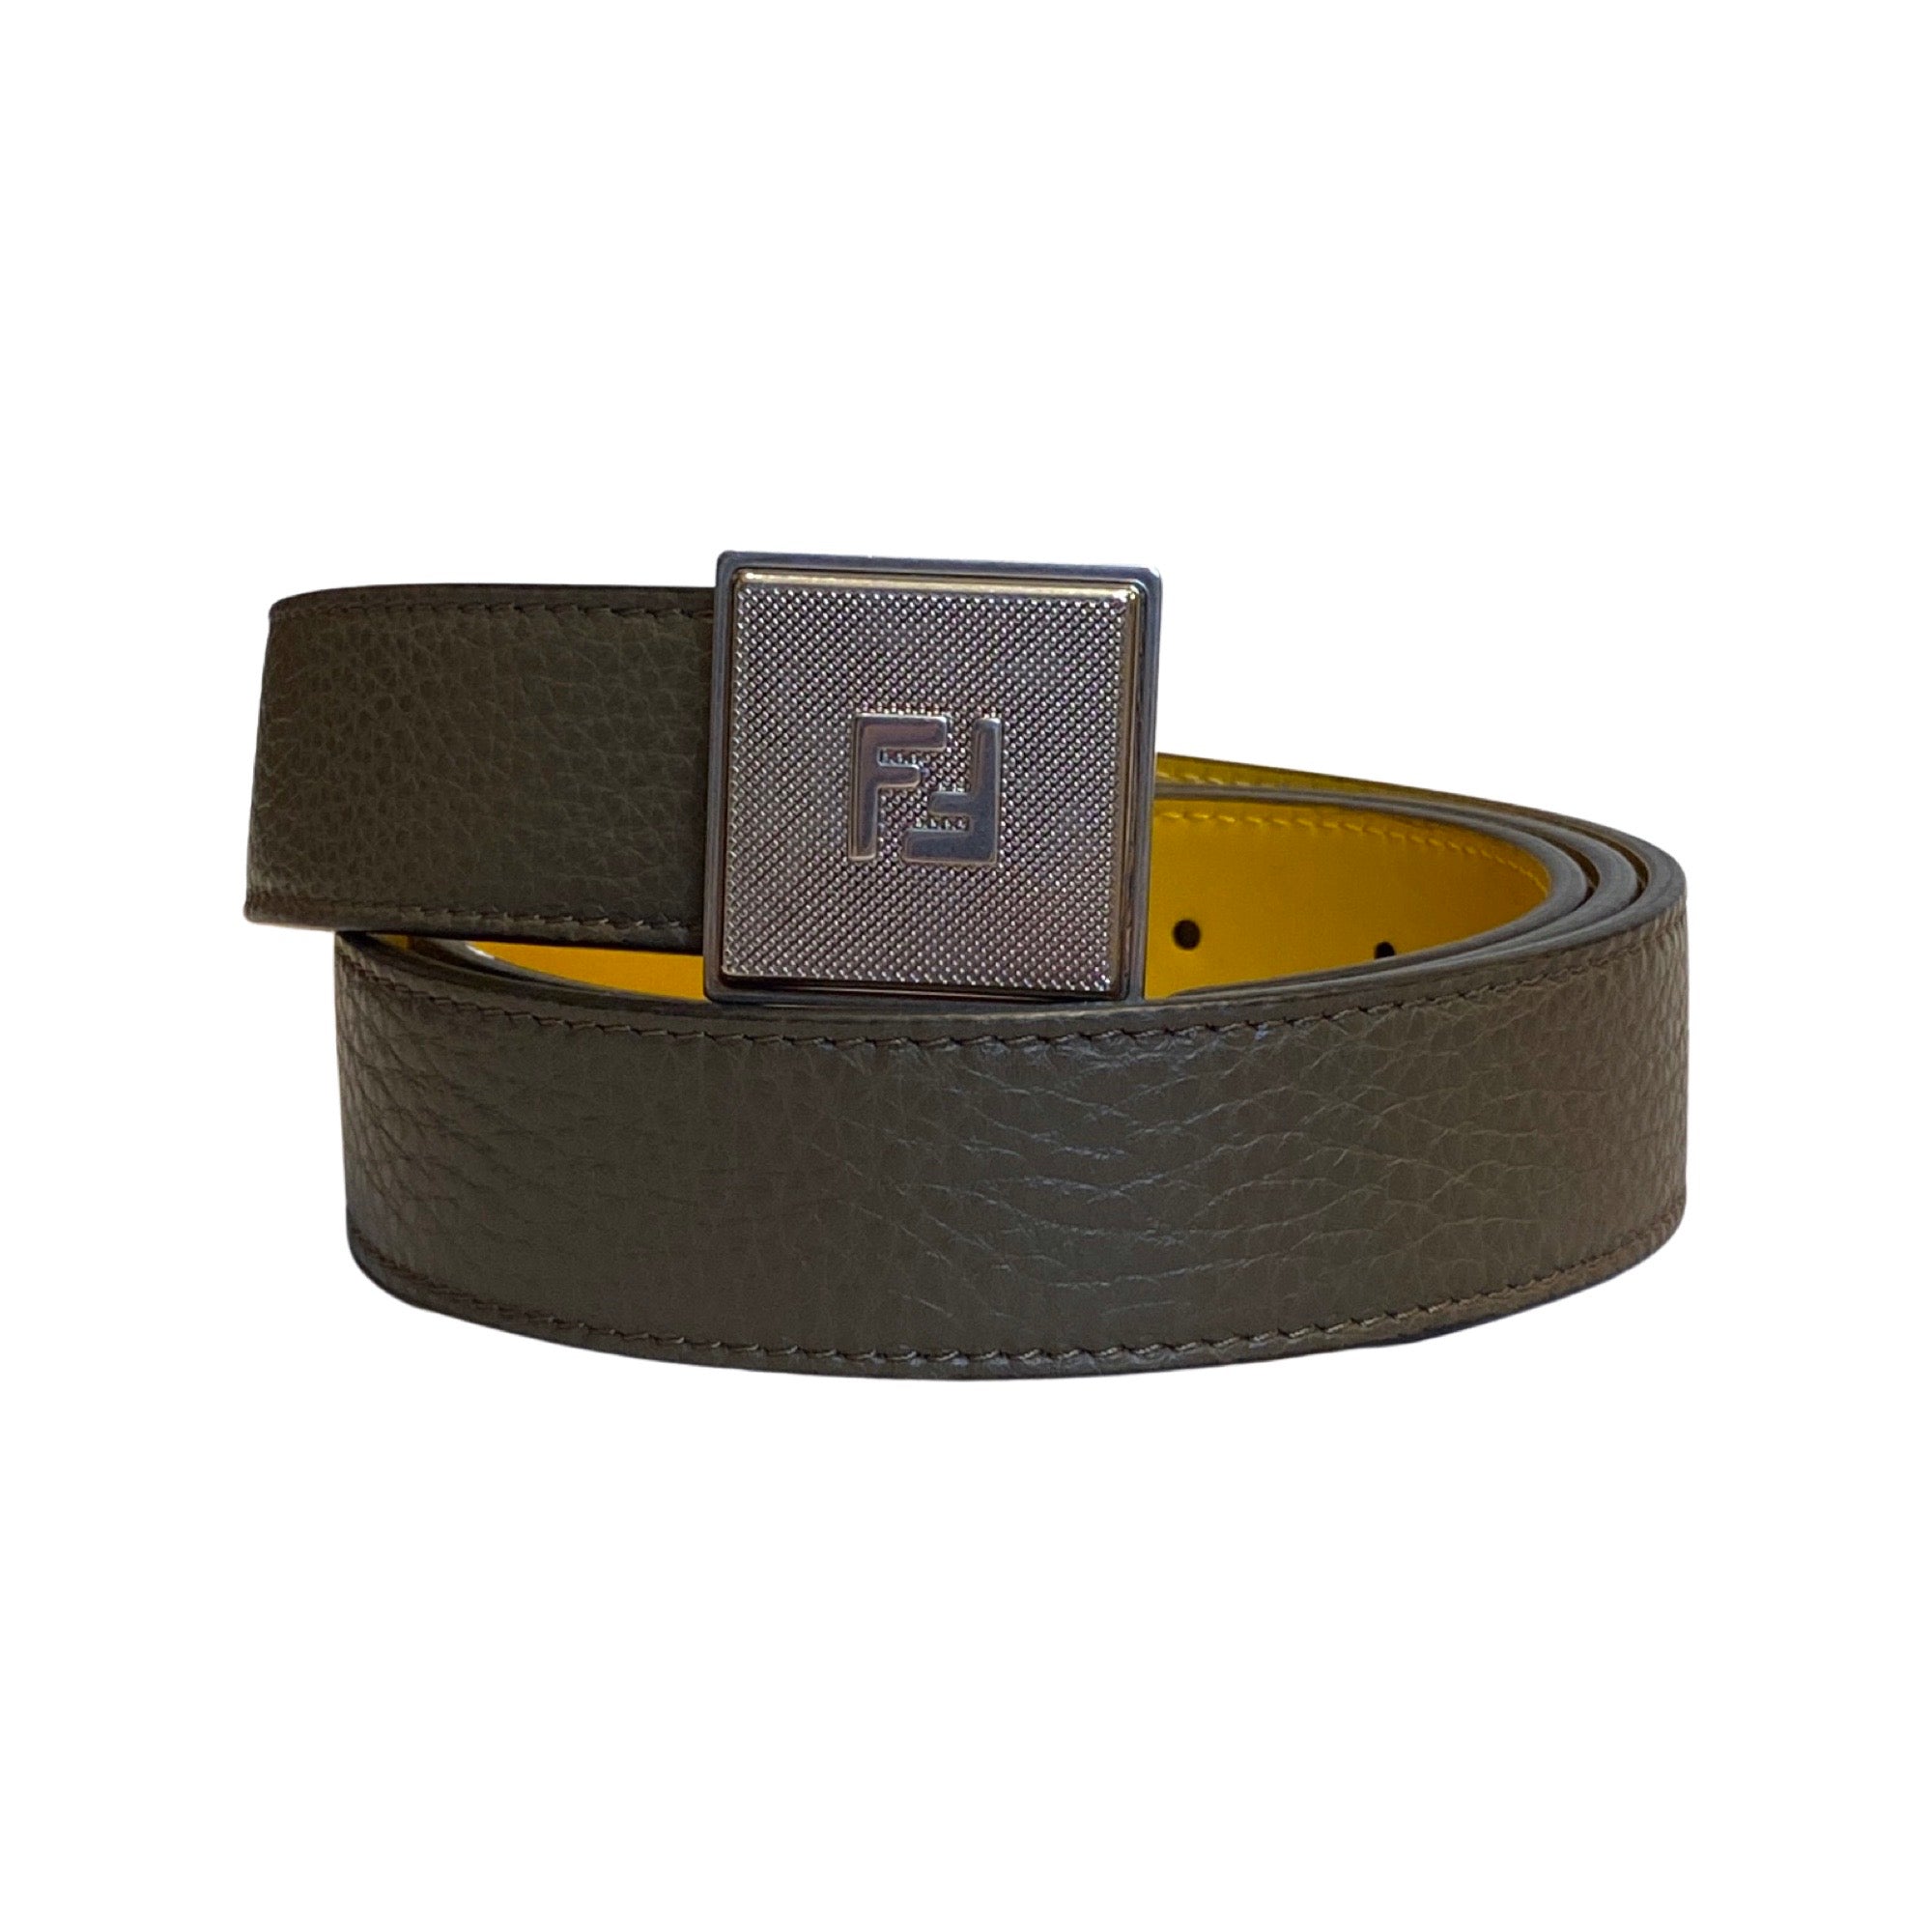 Fendi Yellow Brown Reversible Grained Leather Belt 100